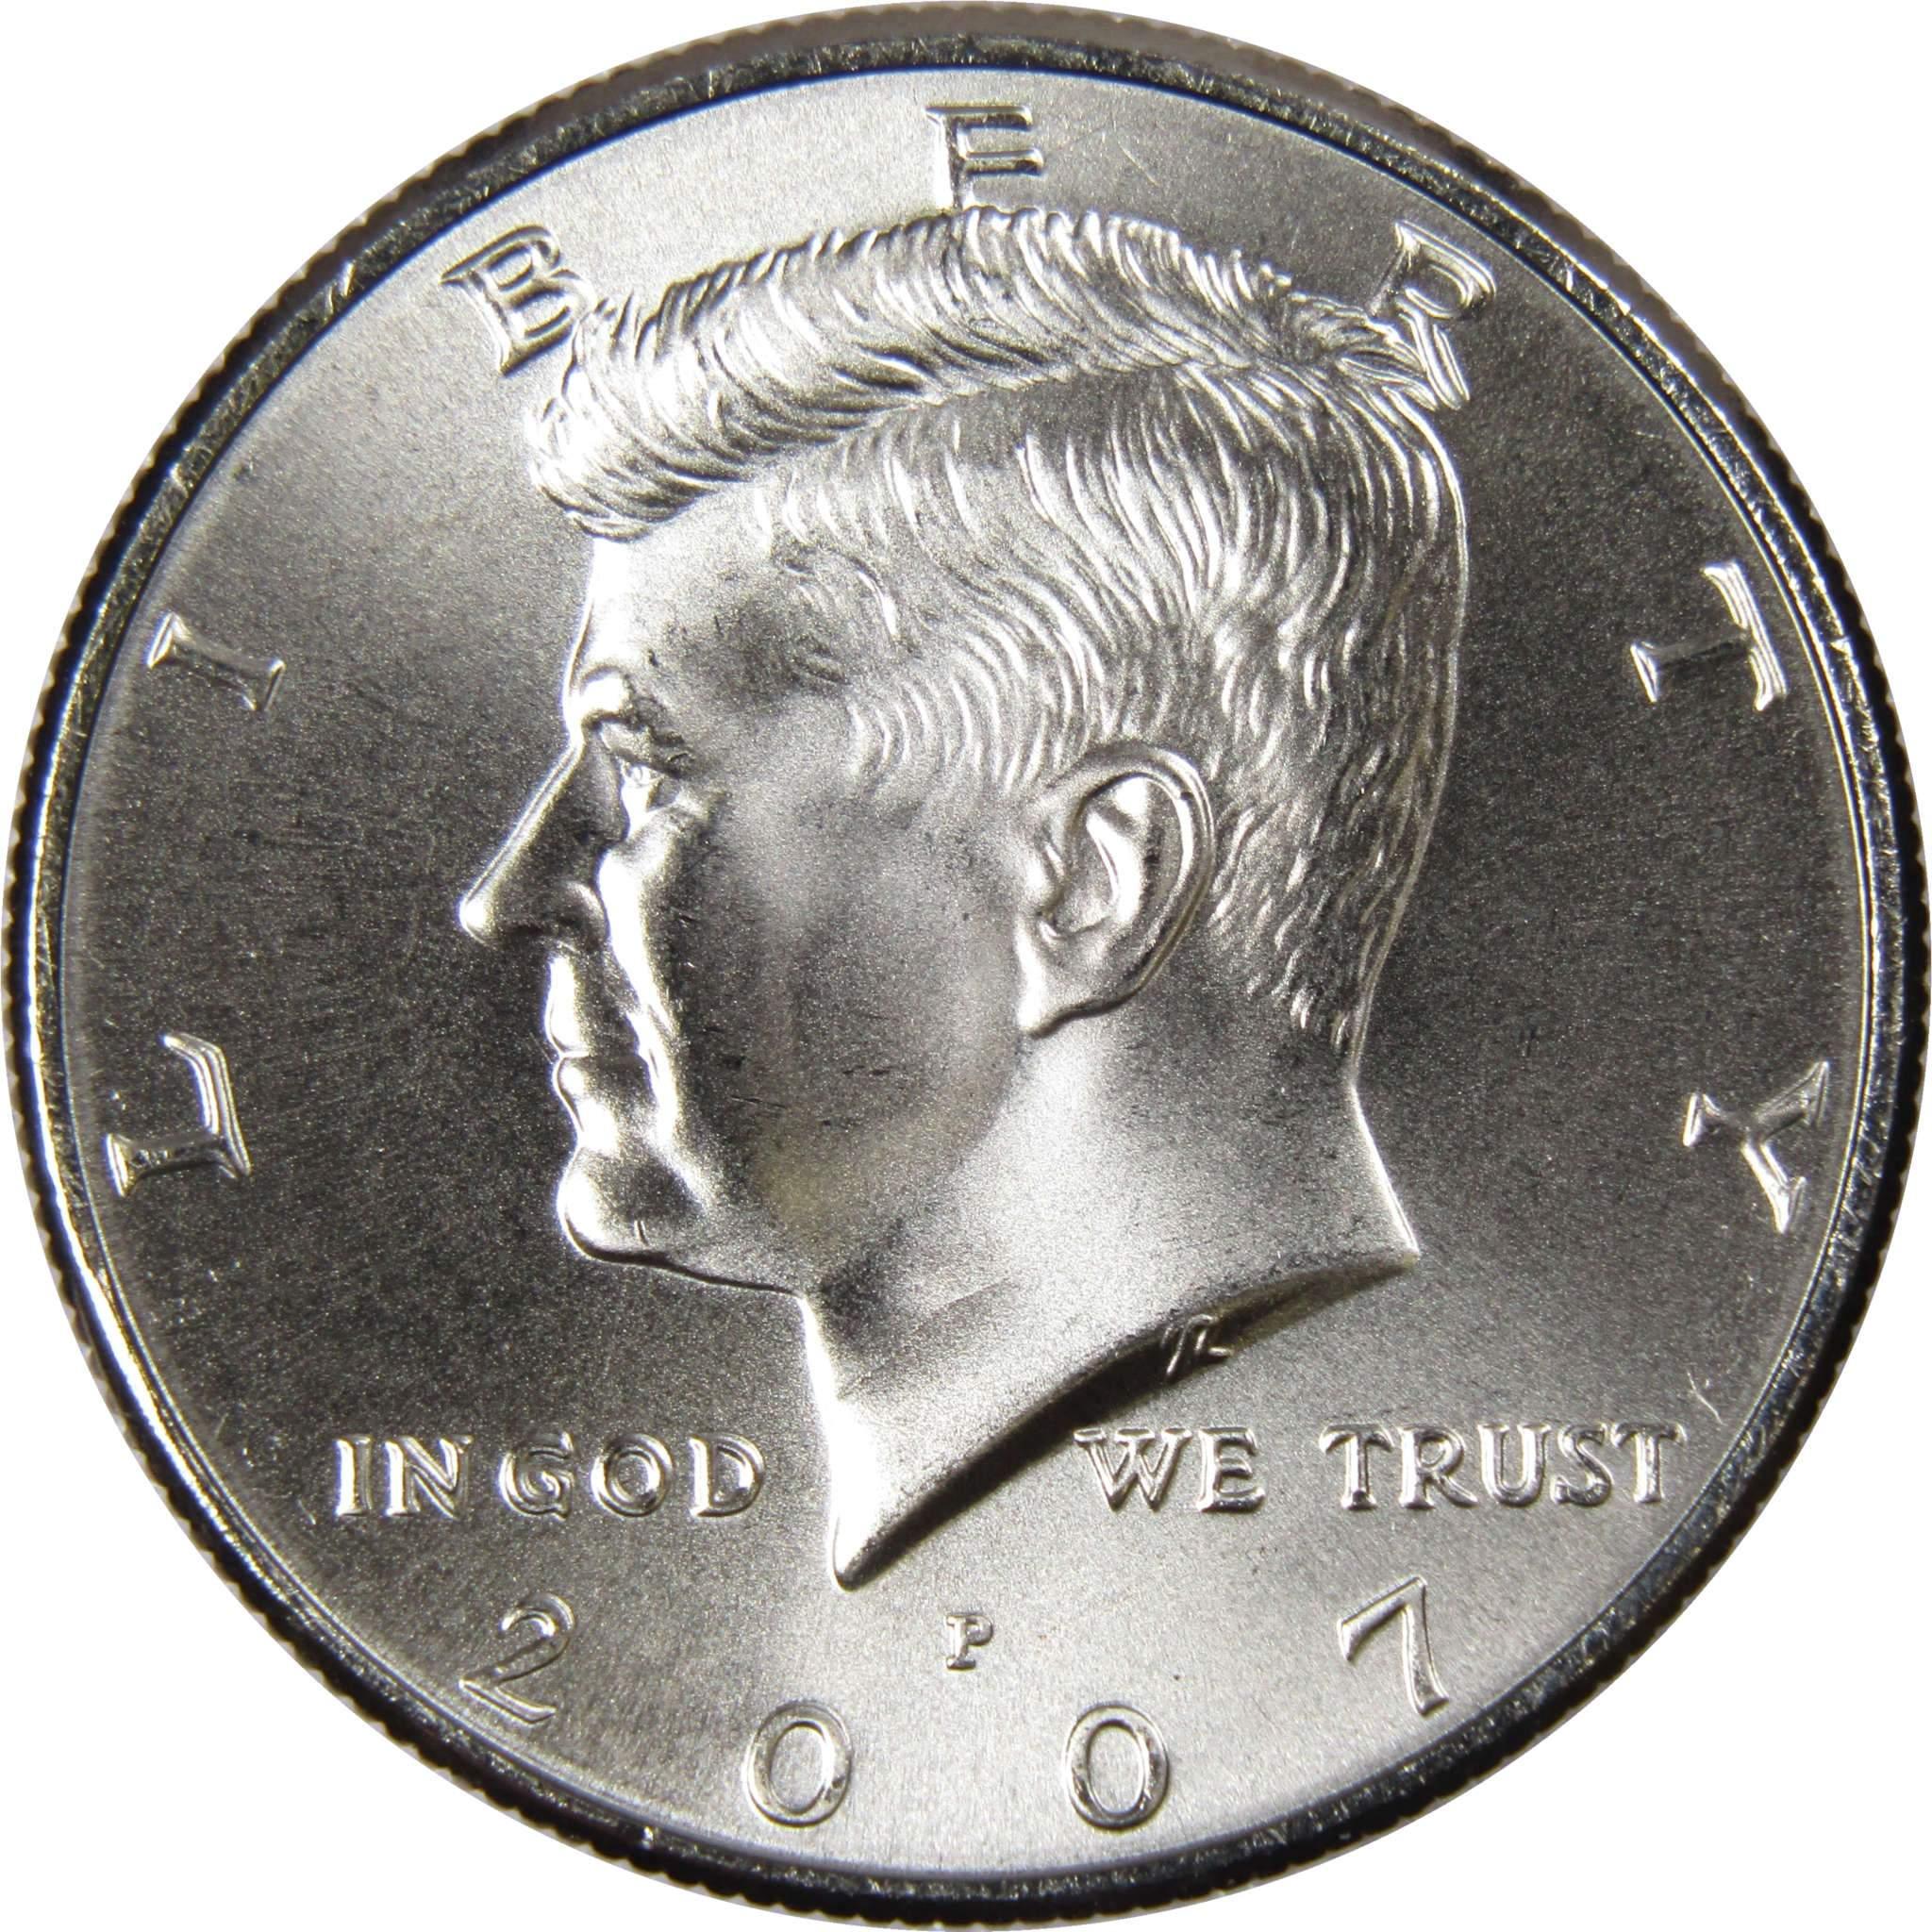 2007 P Kennedy Half Dollar BU Uncirculated Mint State 50c US Coin Collectible